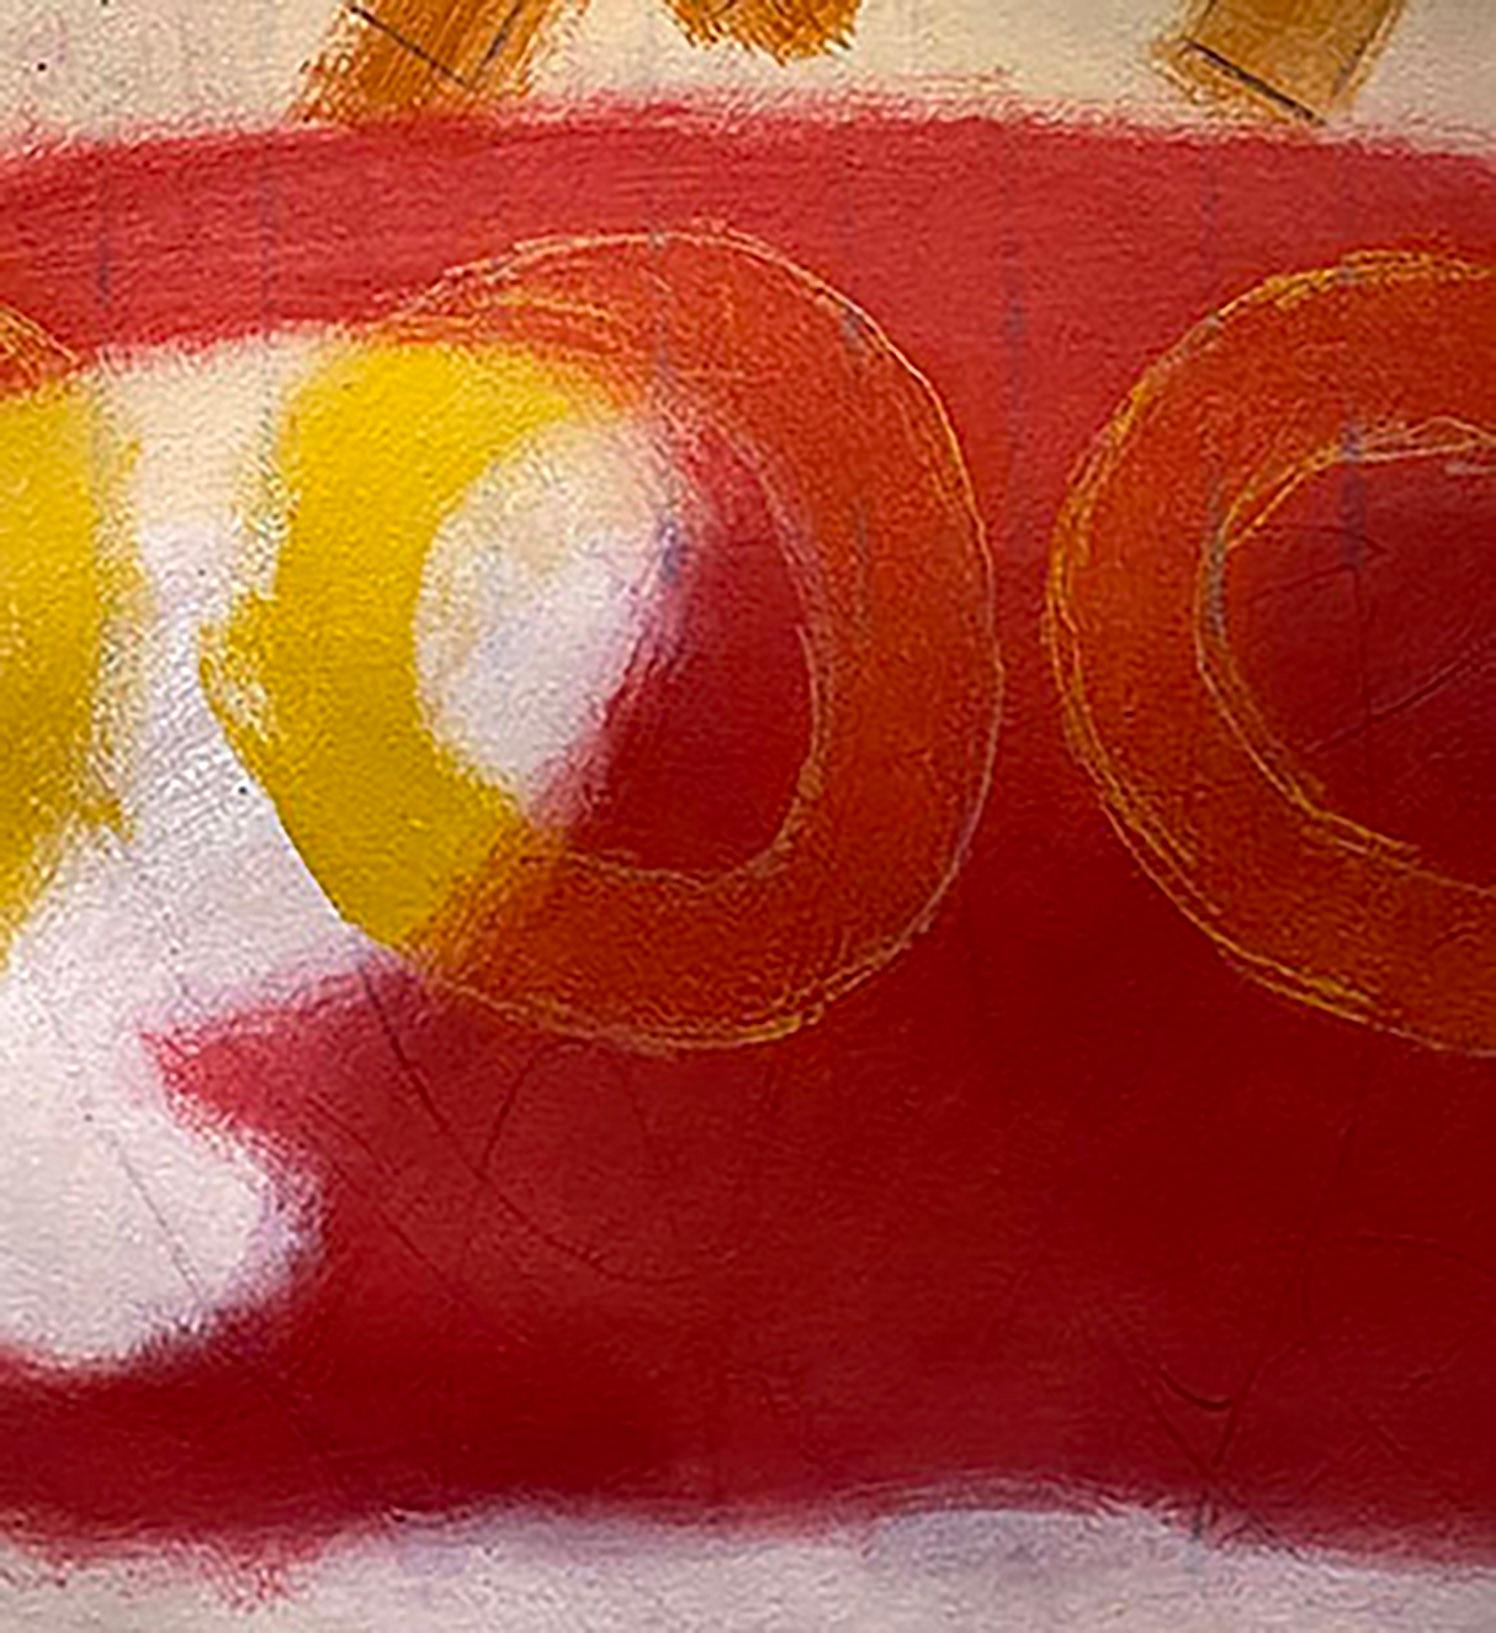 I Heard You Say, black, yellow, orange, red, text, gray, abstract - Painting by Ted Dixon